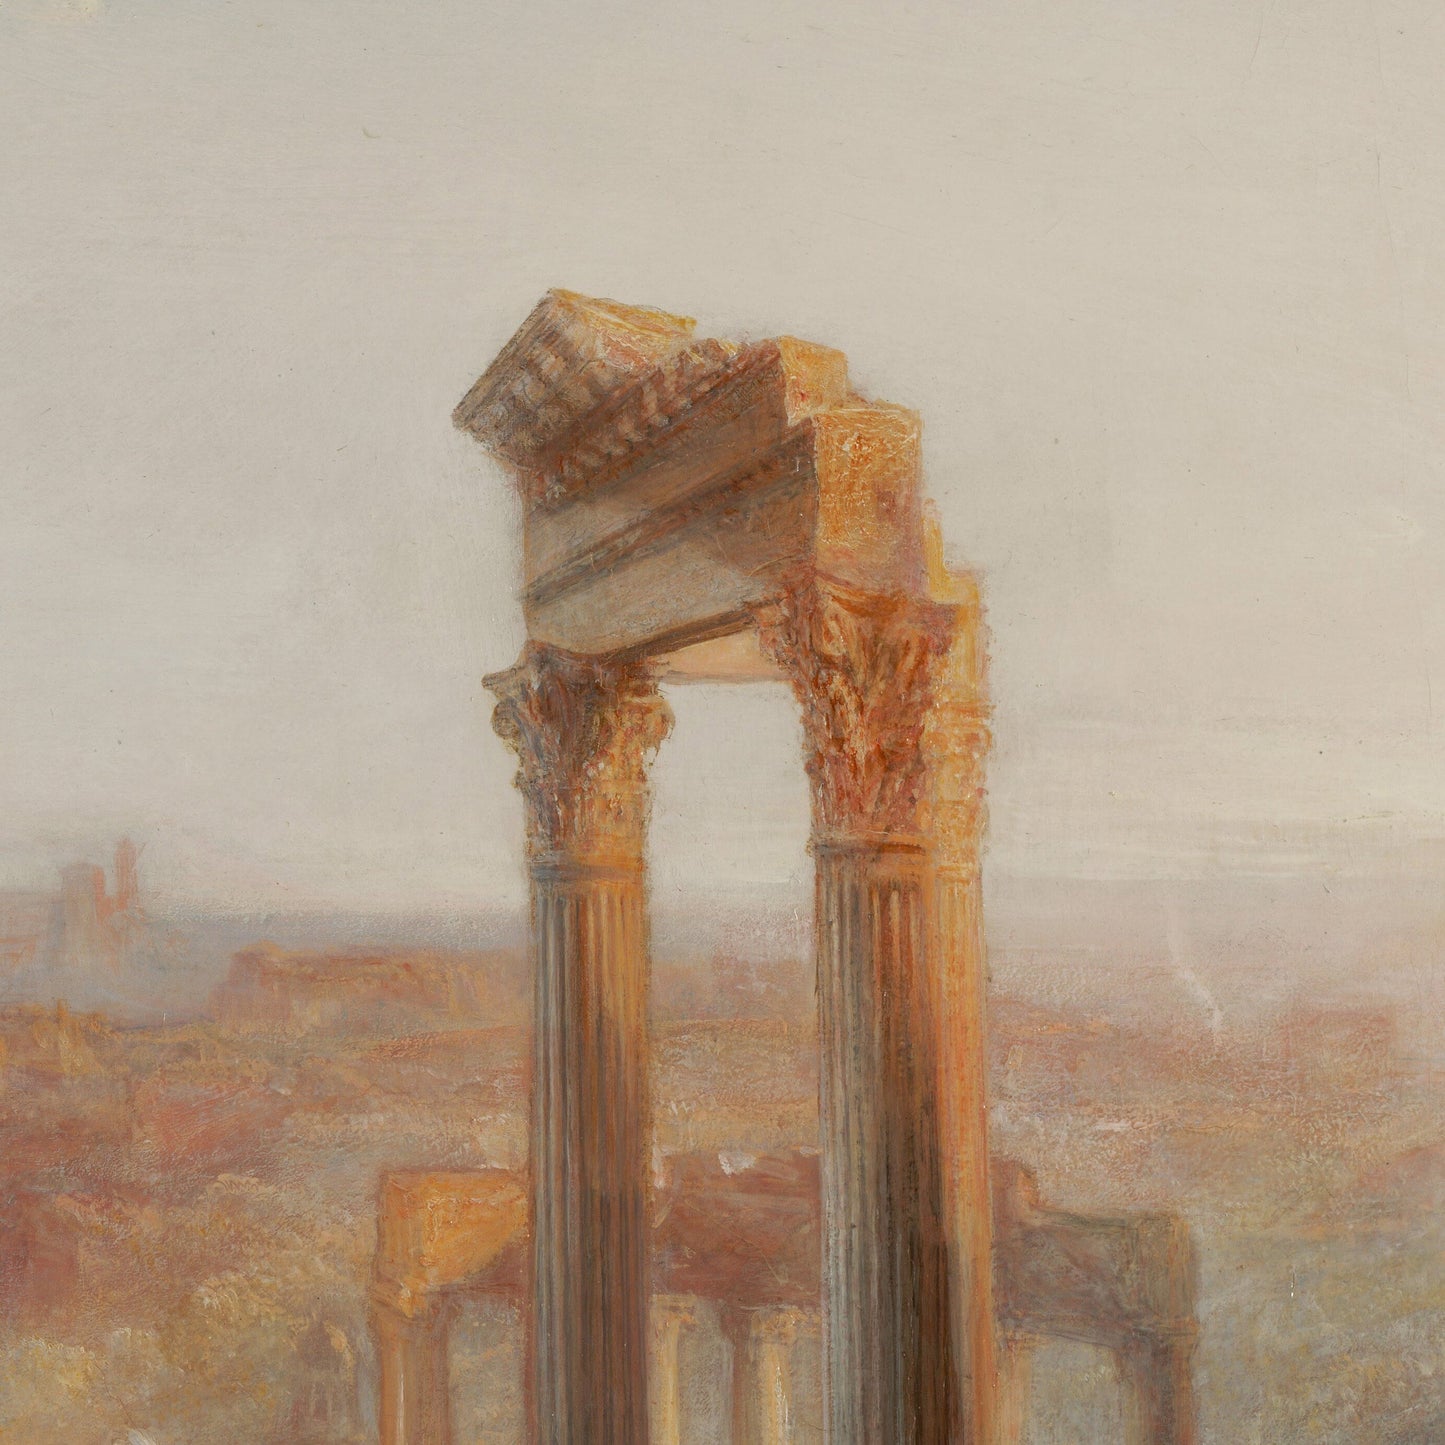 Modern Rome by J.M.W Turner, 3d Printed with texture and brush strokes looks like original oil-painting, code:136